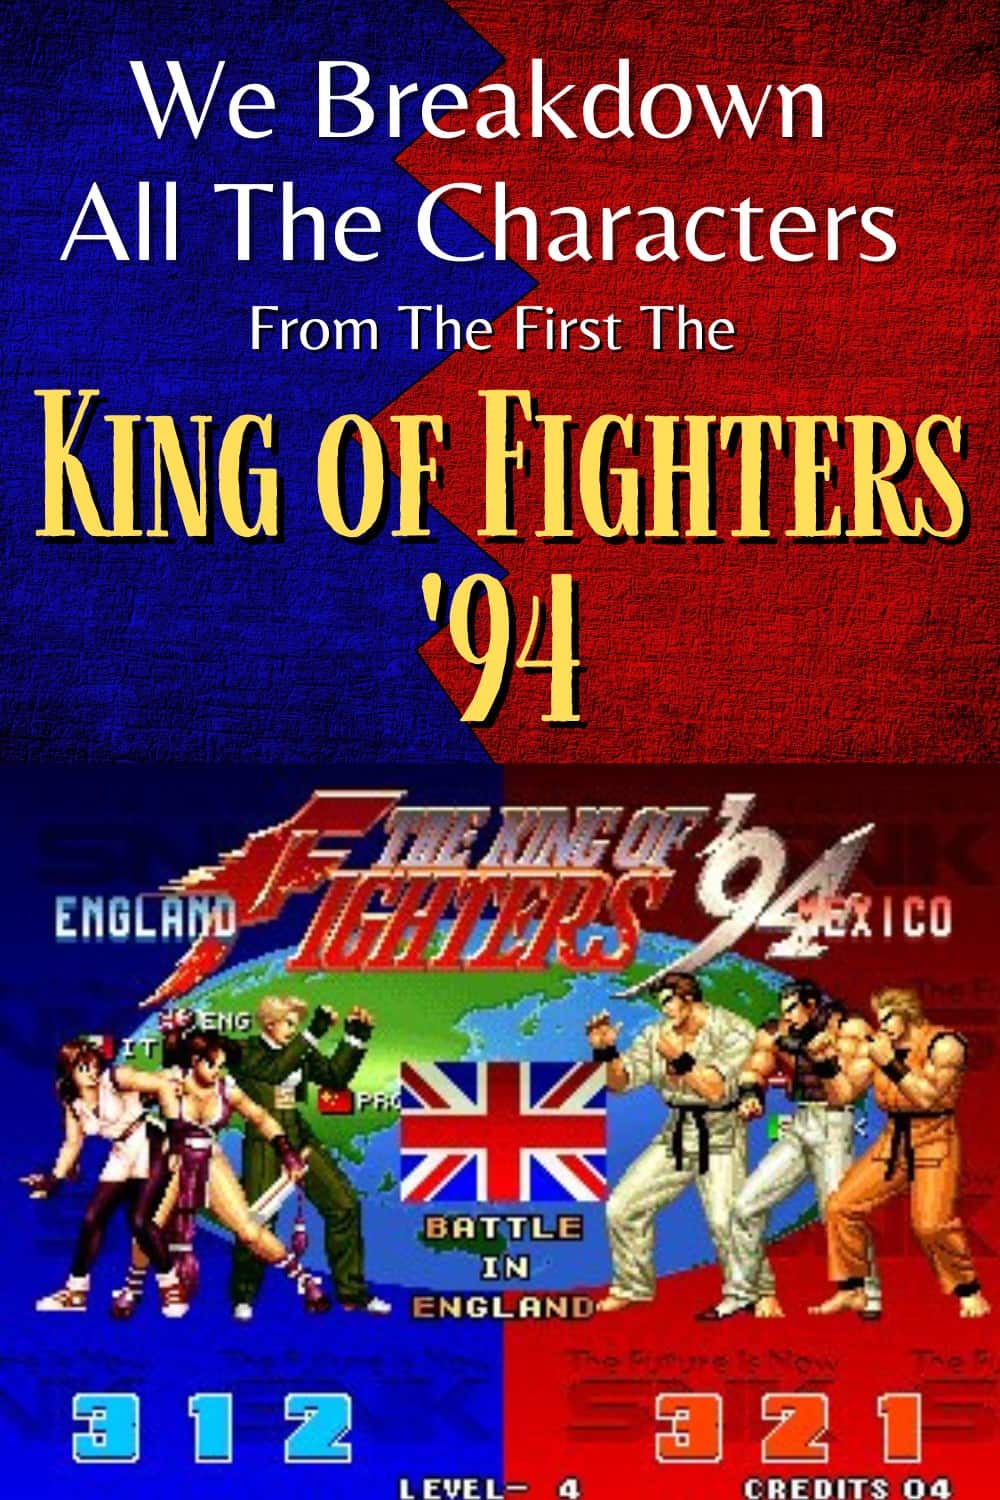 The King of Fighters 94 Character List and Bios